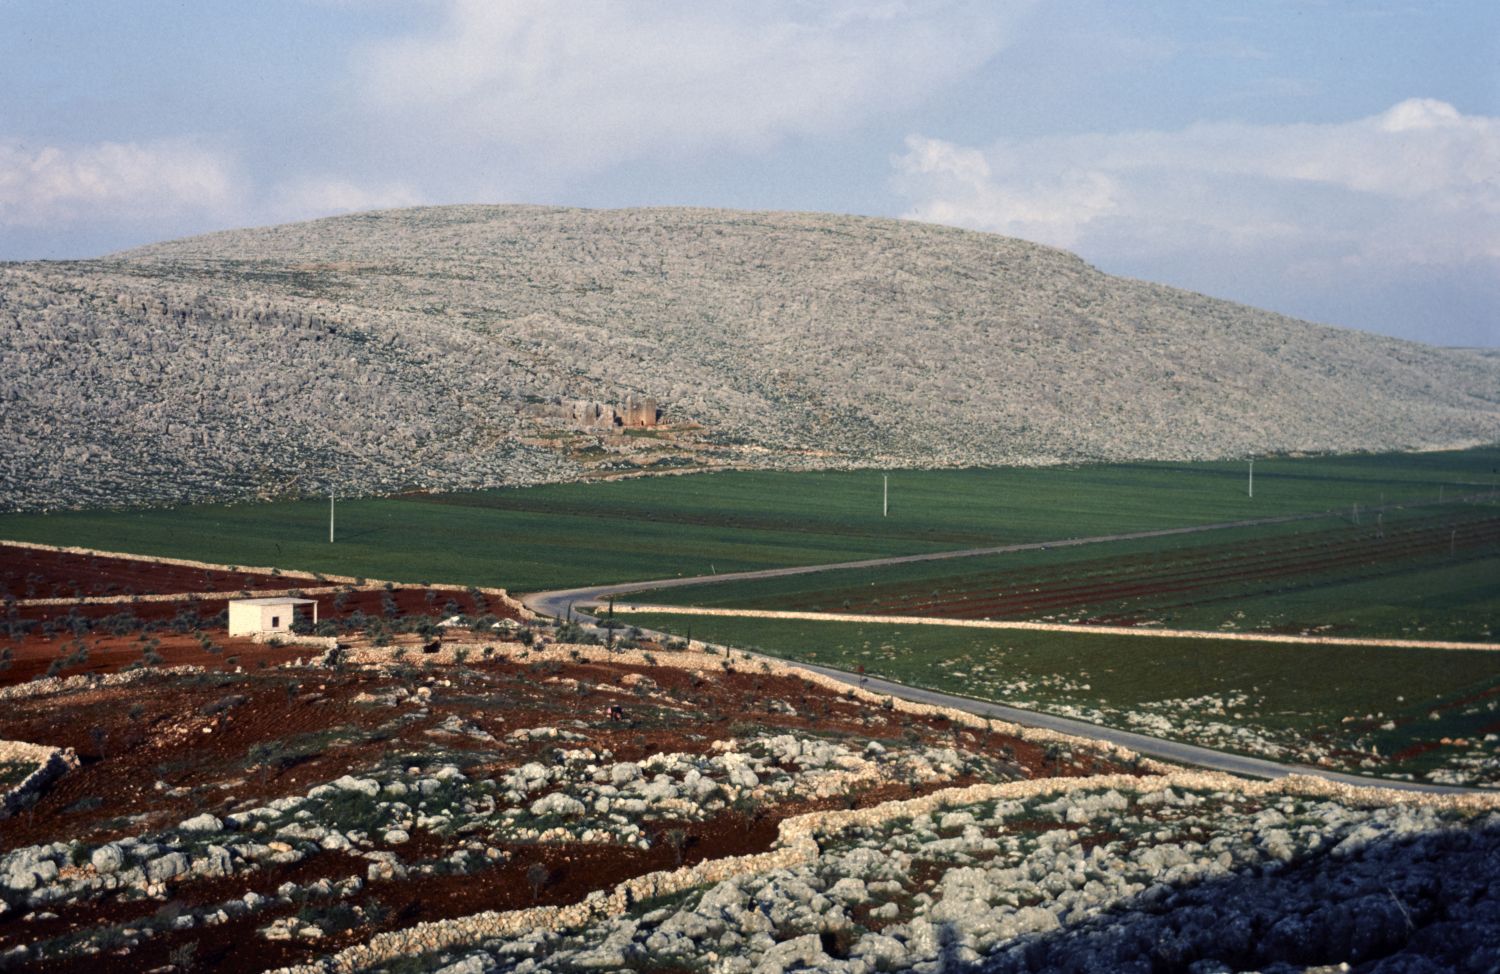 al-Burayj - General view of the site from the southwest, showing the edge of the plain of al-Dana and slopes of Jabal Barisha.